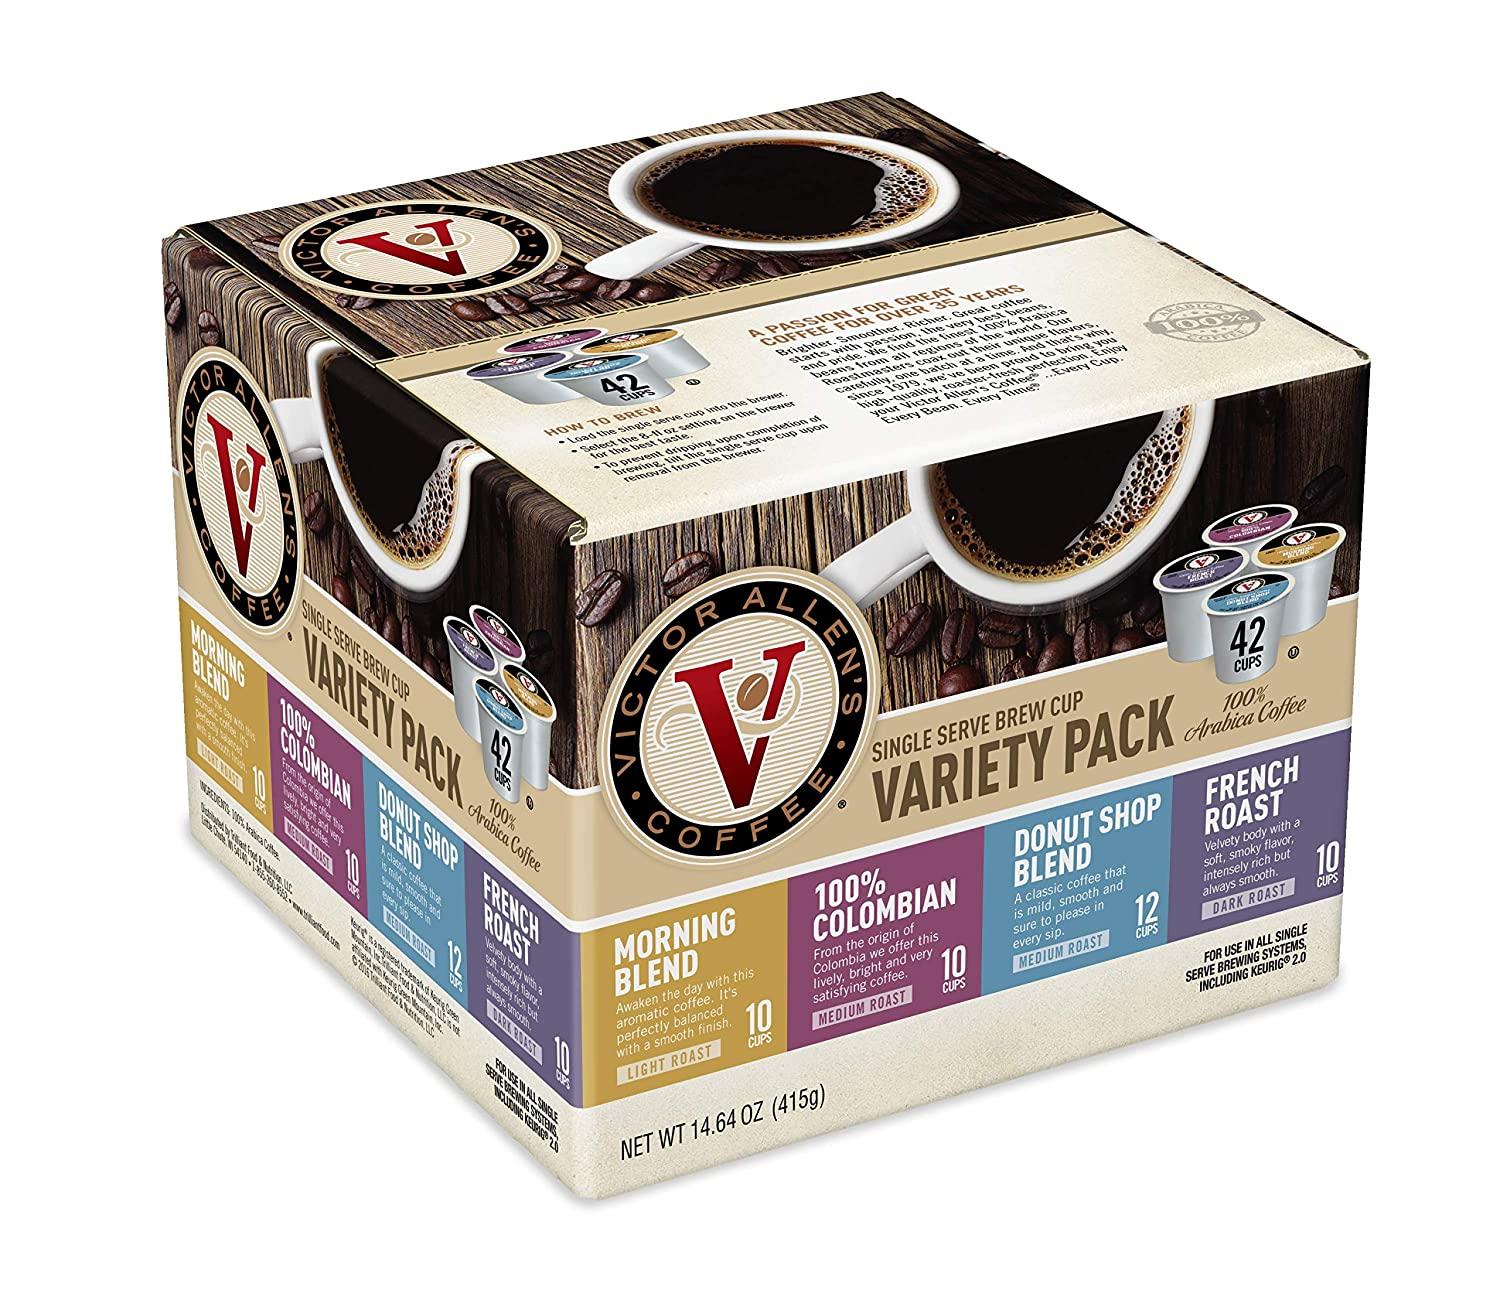 42 Victor Allens Coffee Keurig K-Cup Pods for $8.77 Shipped